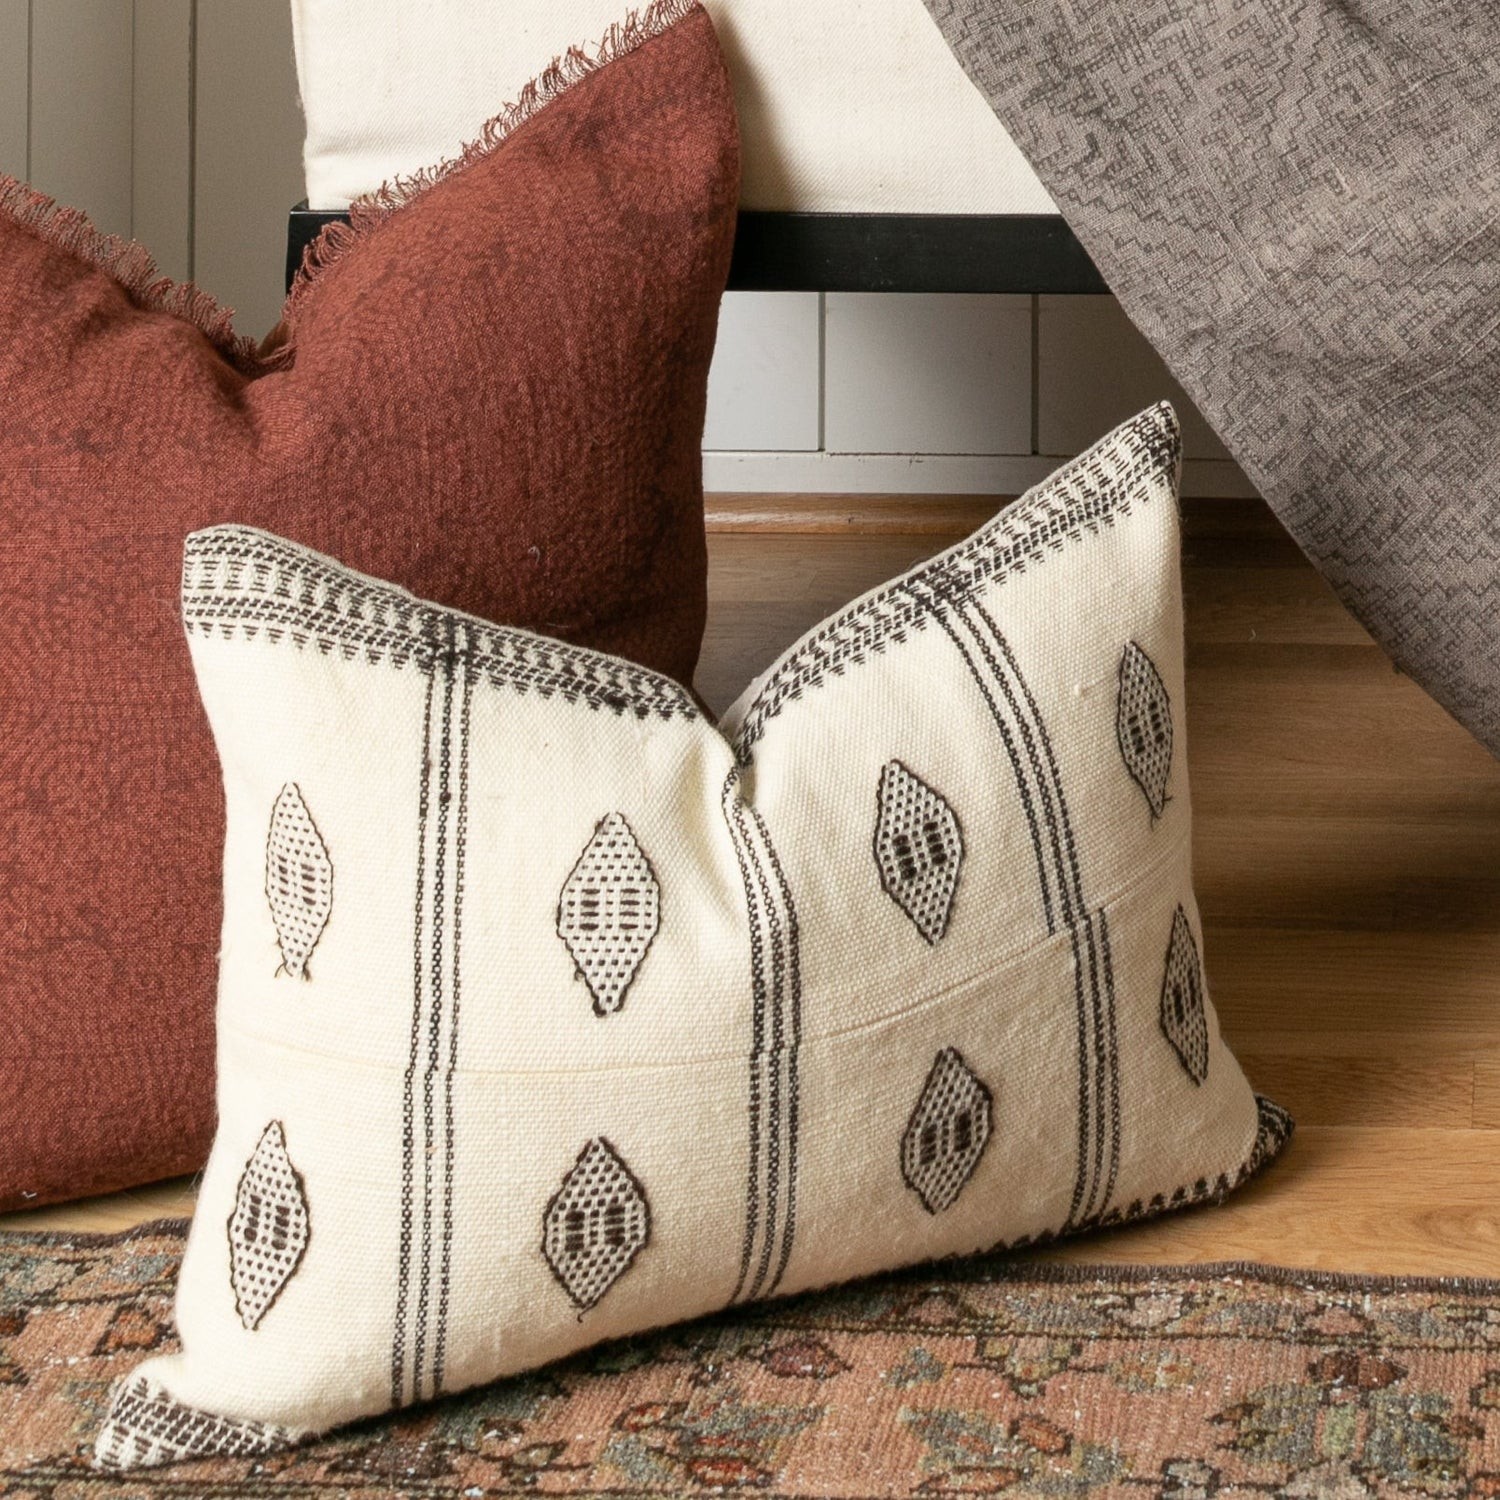 two pillows sitting on top of a wooden floor